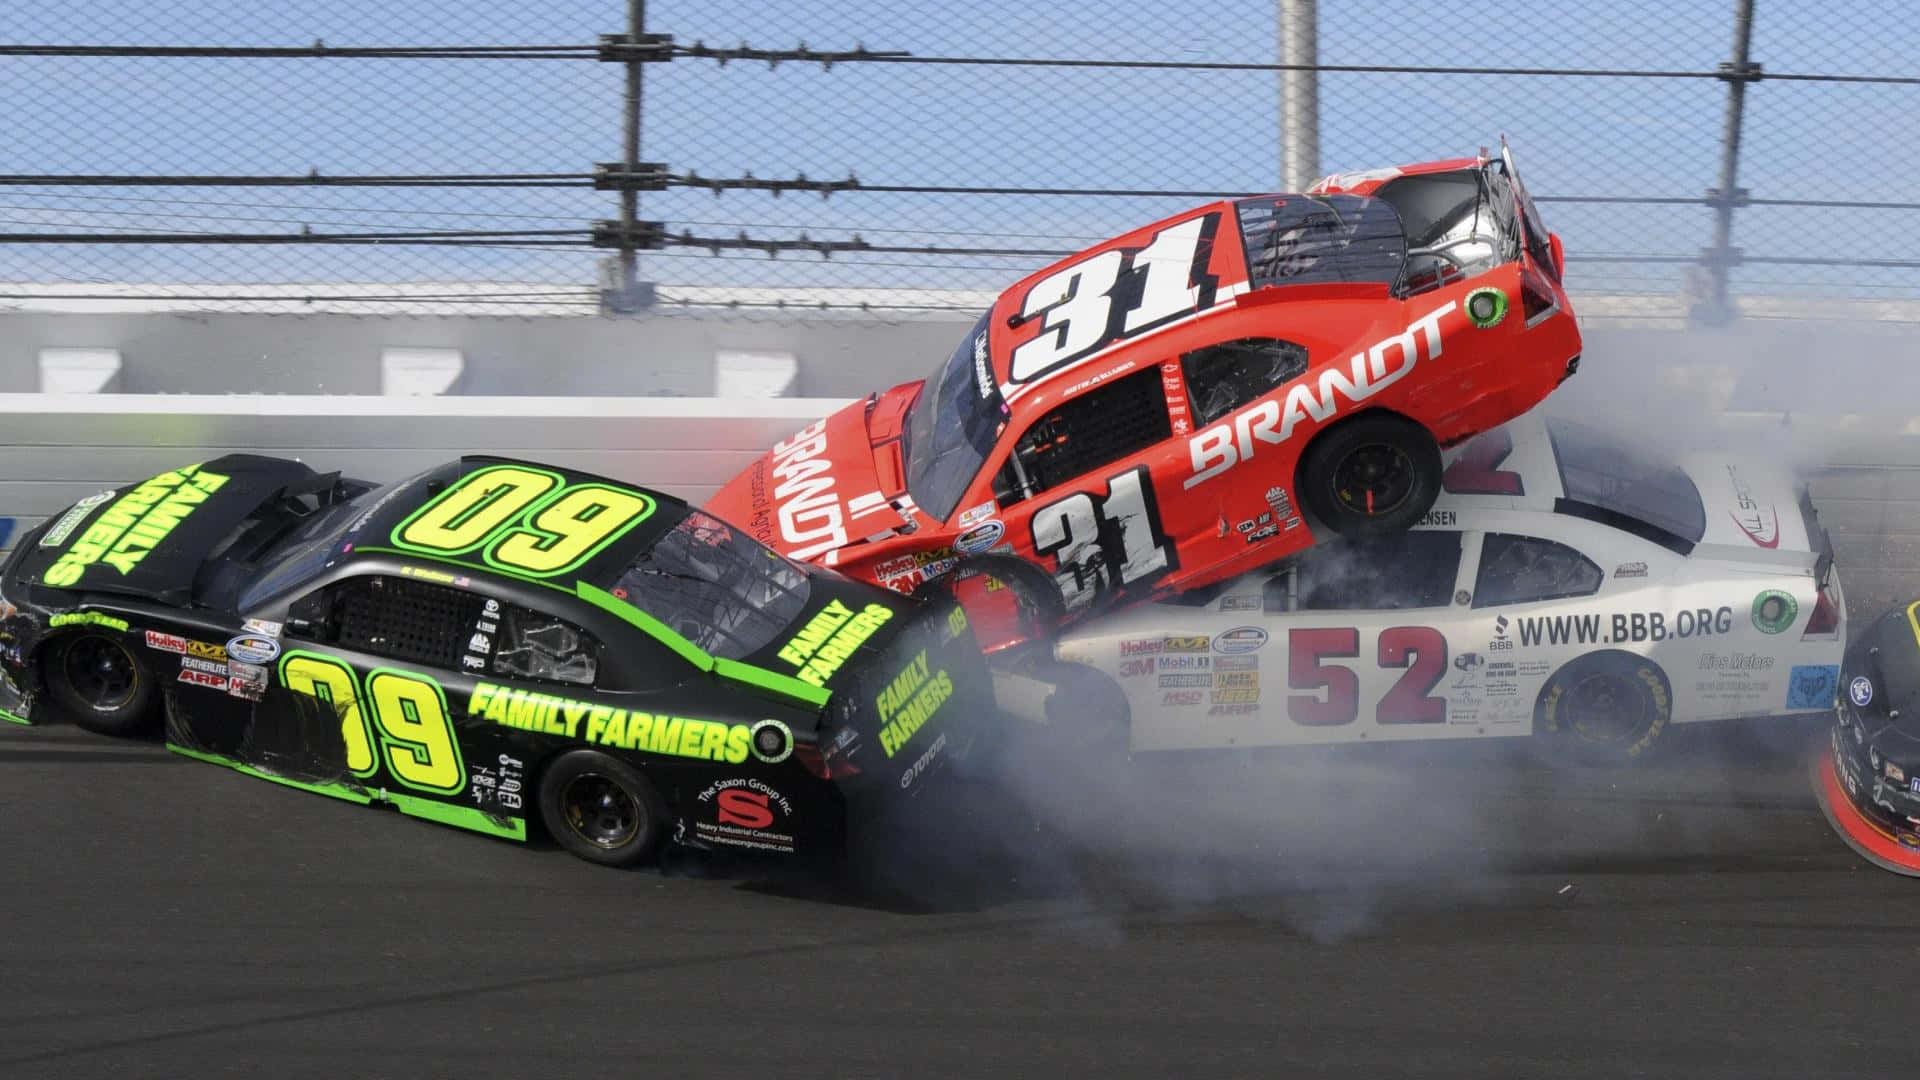 High-speed Action At The Nascar Racing Event